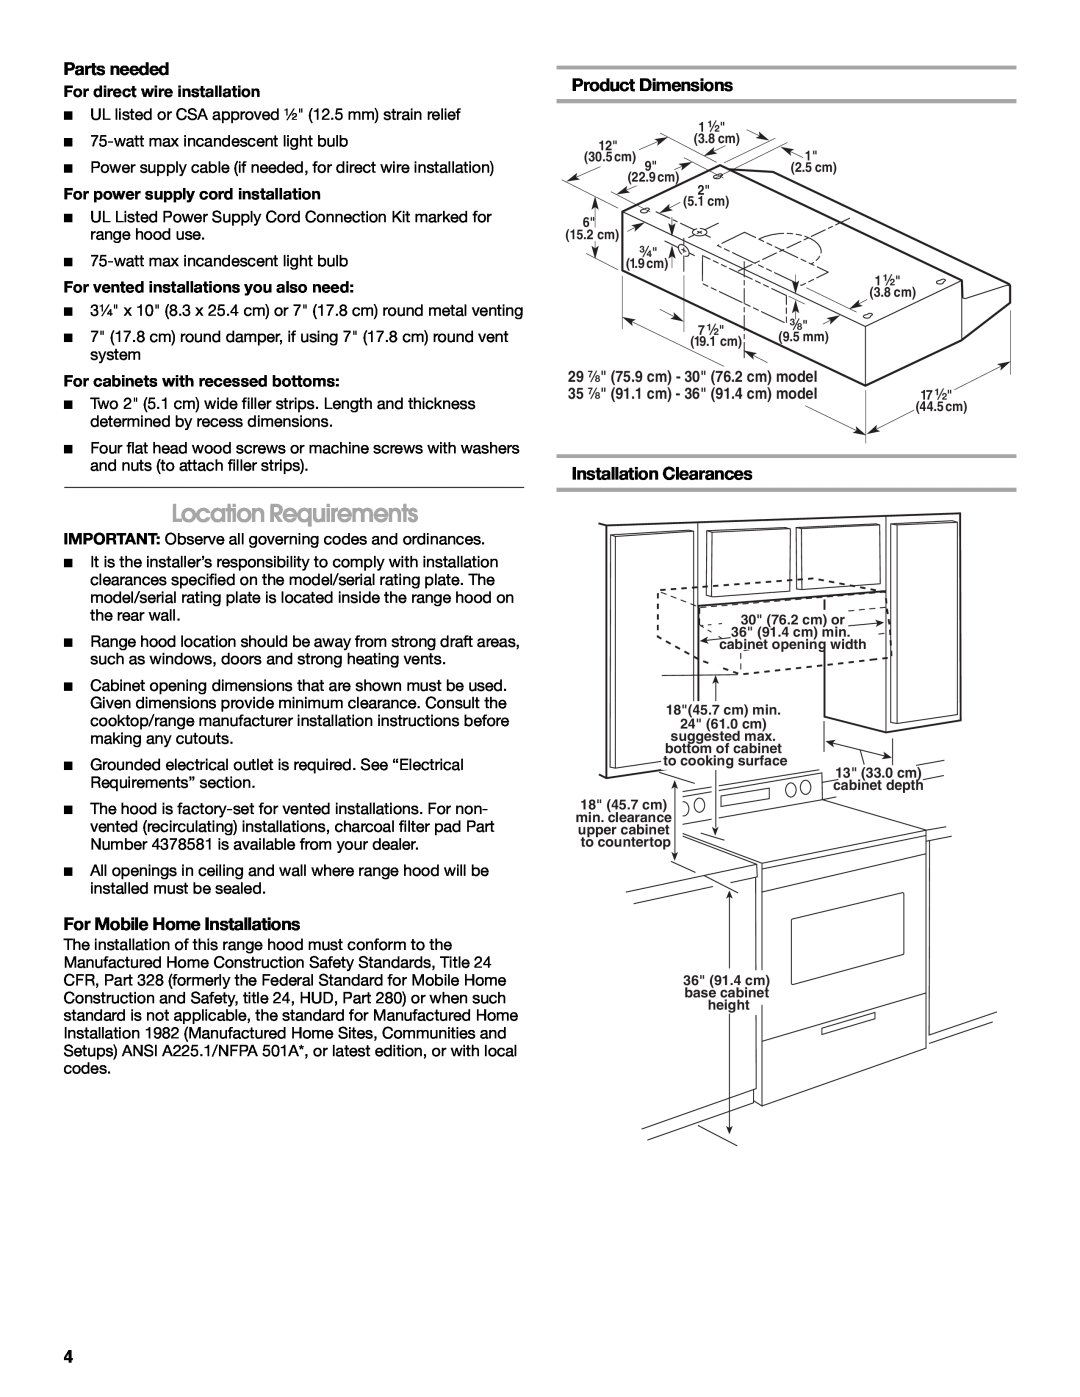 Whirlpool W10240546A, 99044504A Location Requirements, Parts needed, For Mobile Home Installations, Product Dimensions 